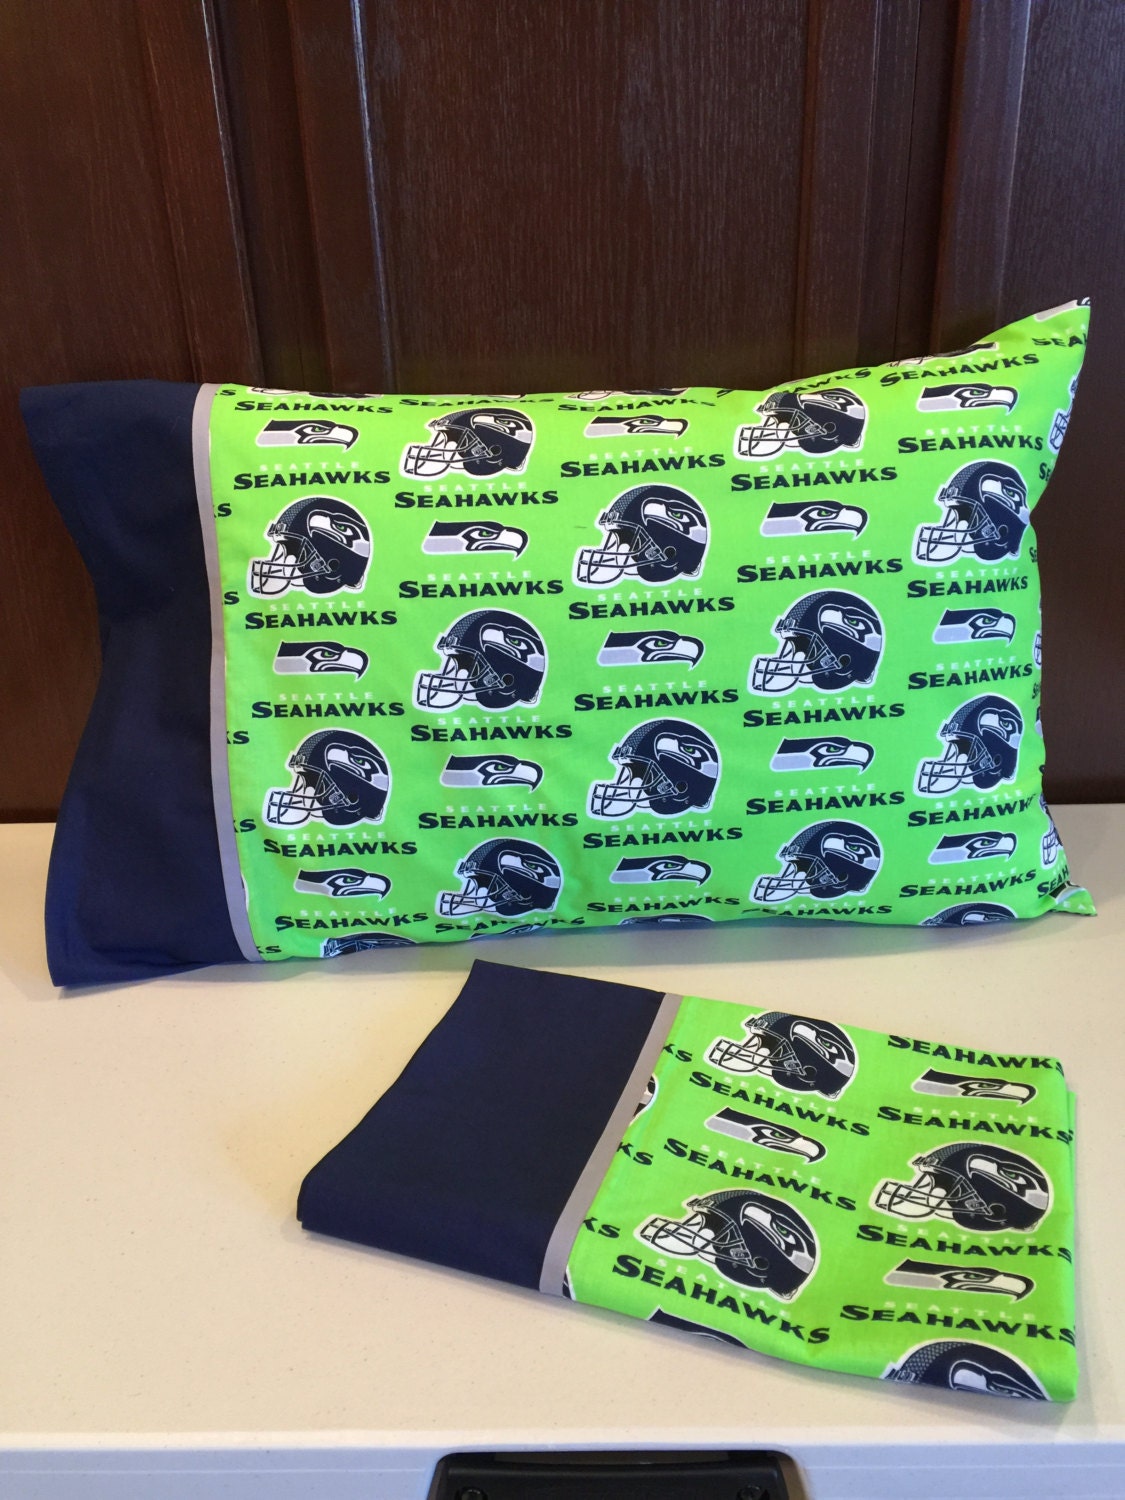 Seattle Seahawks cotton pillow case with bright green cuff